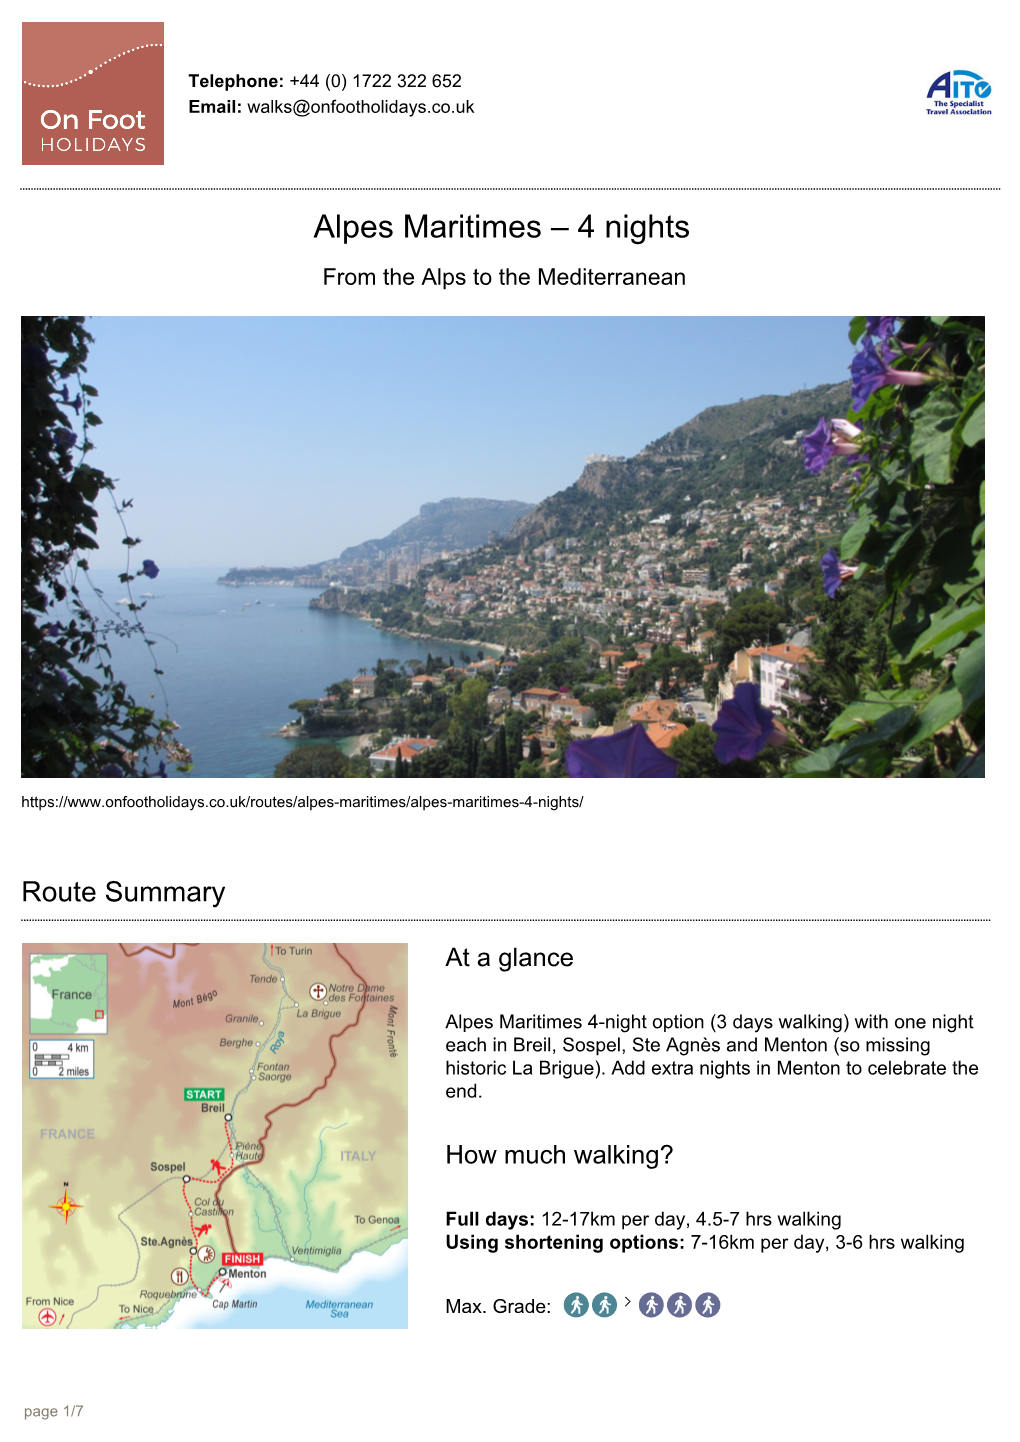 Alpes Maritimes – 4 Nights from the Alps to the Mediterranean